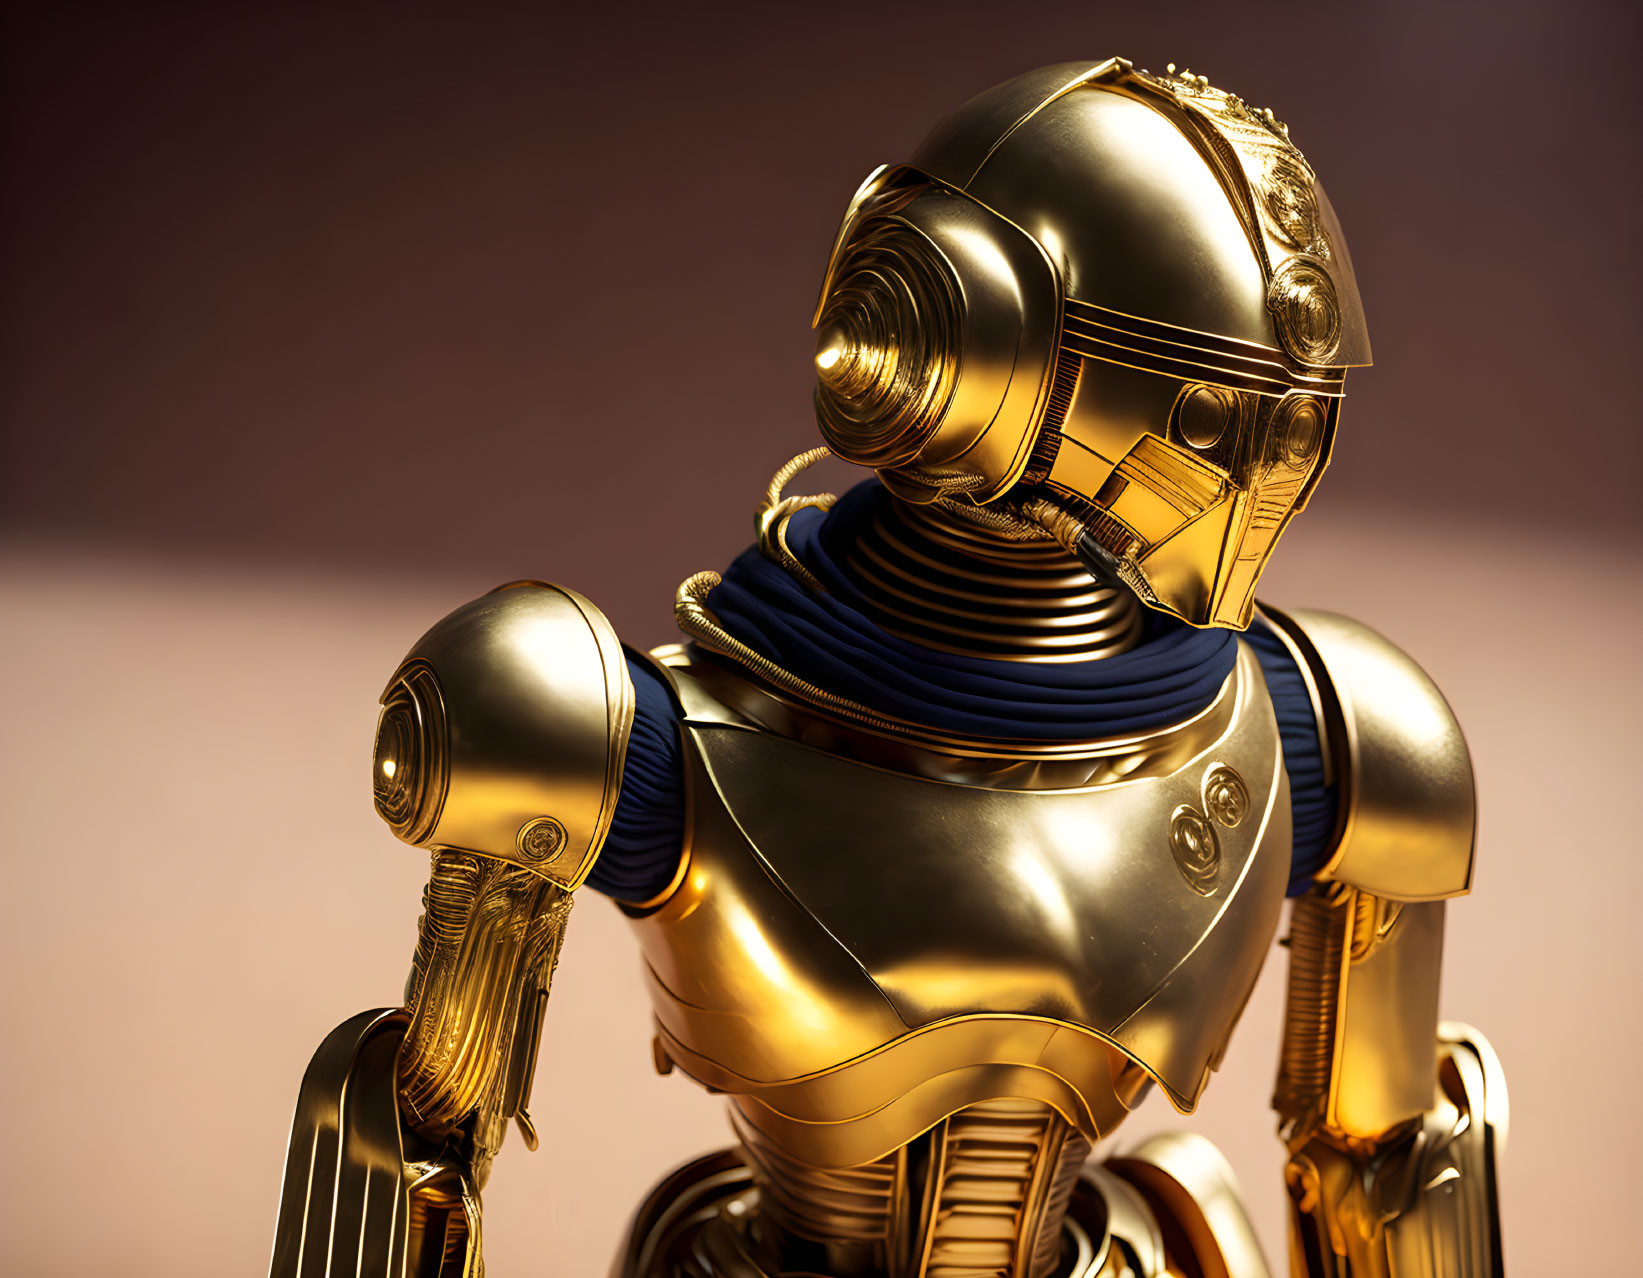 Golden humanoid robot with intricate designs and blue scarf on warm backdrop